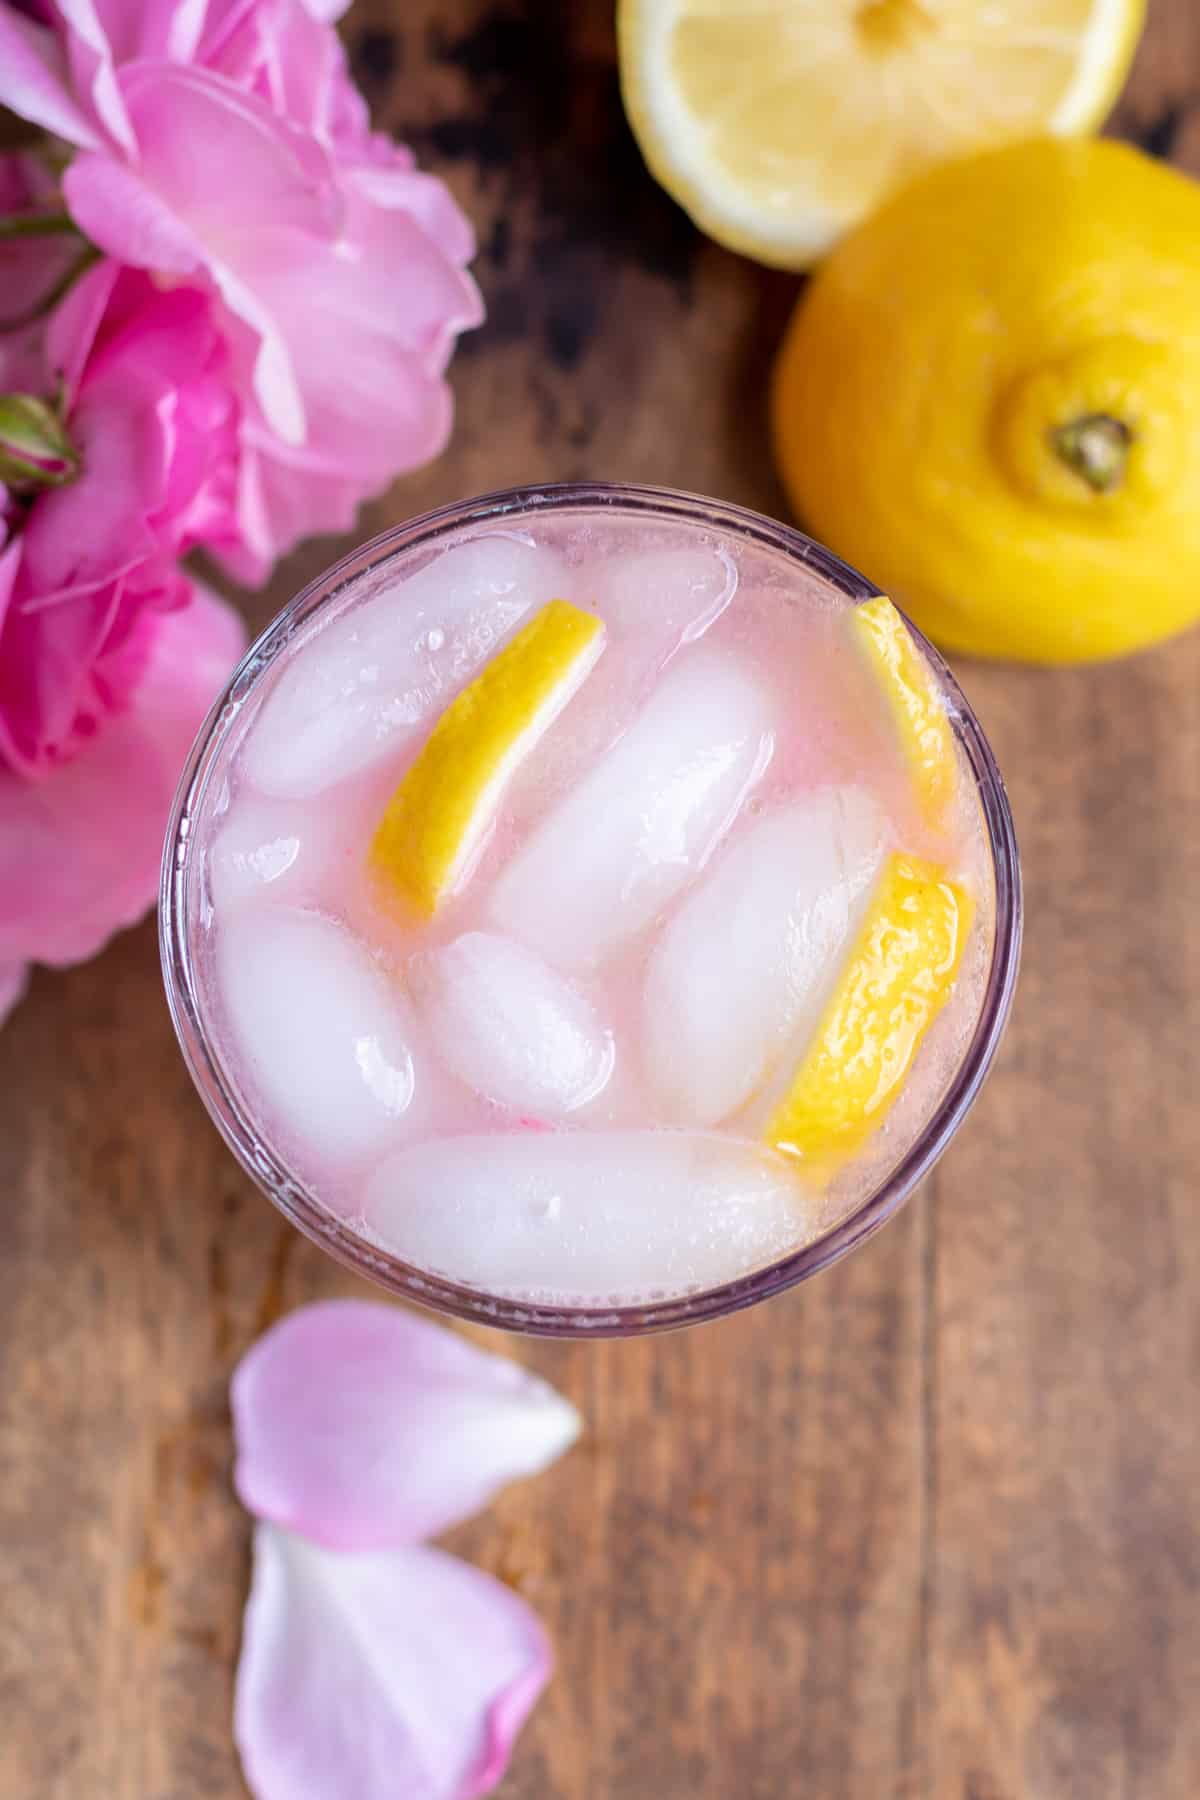 Looking down at a glass of rose lemonade, next to roses and lemons.